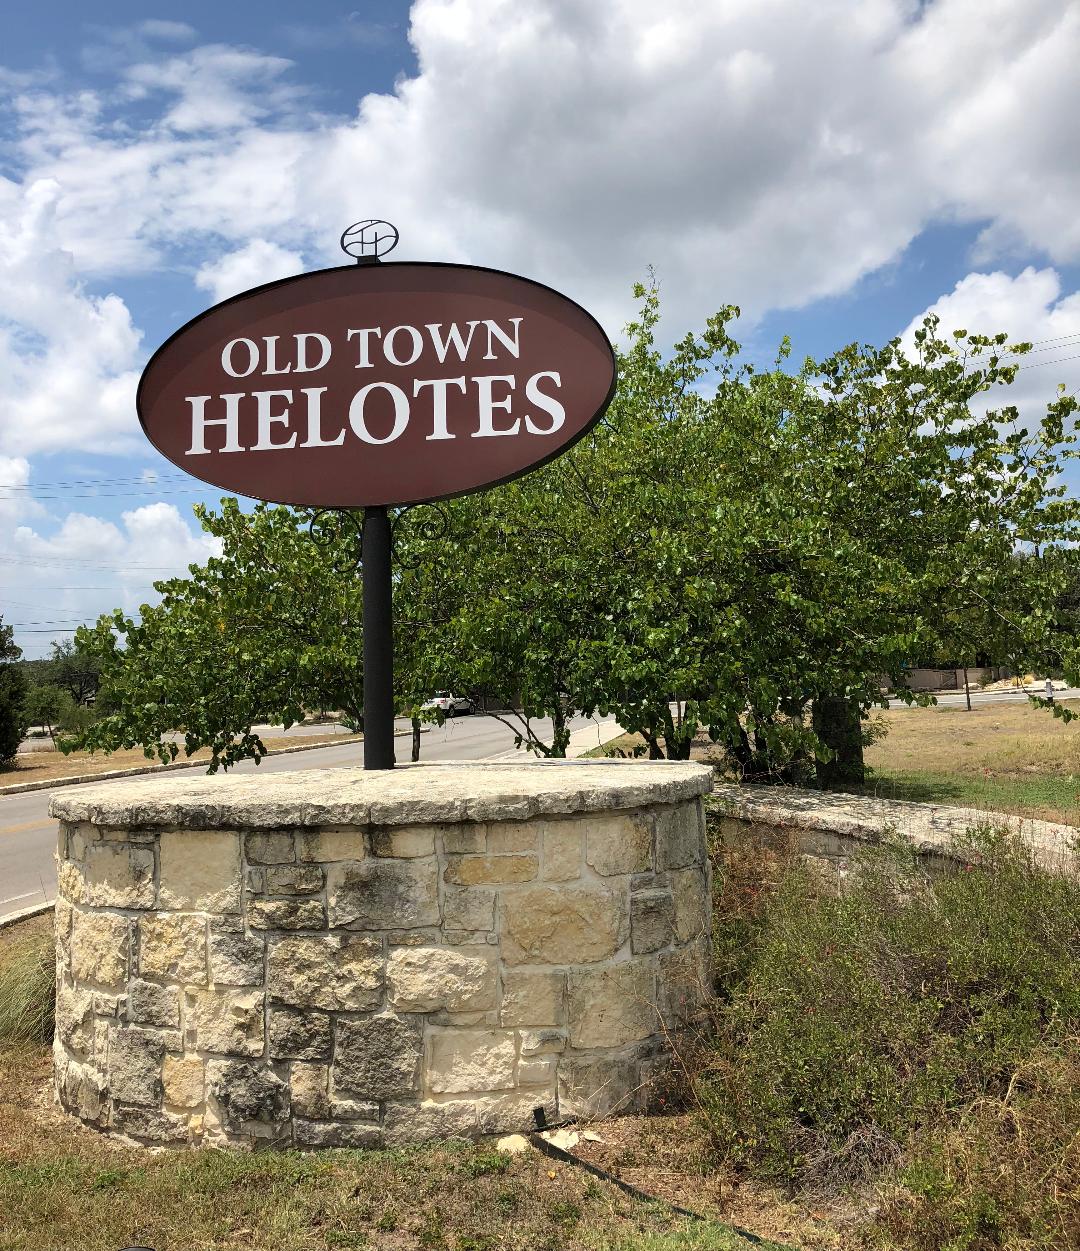 Enjoy a Local Day Trip to Old Town Helotes